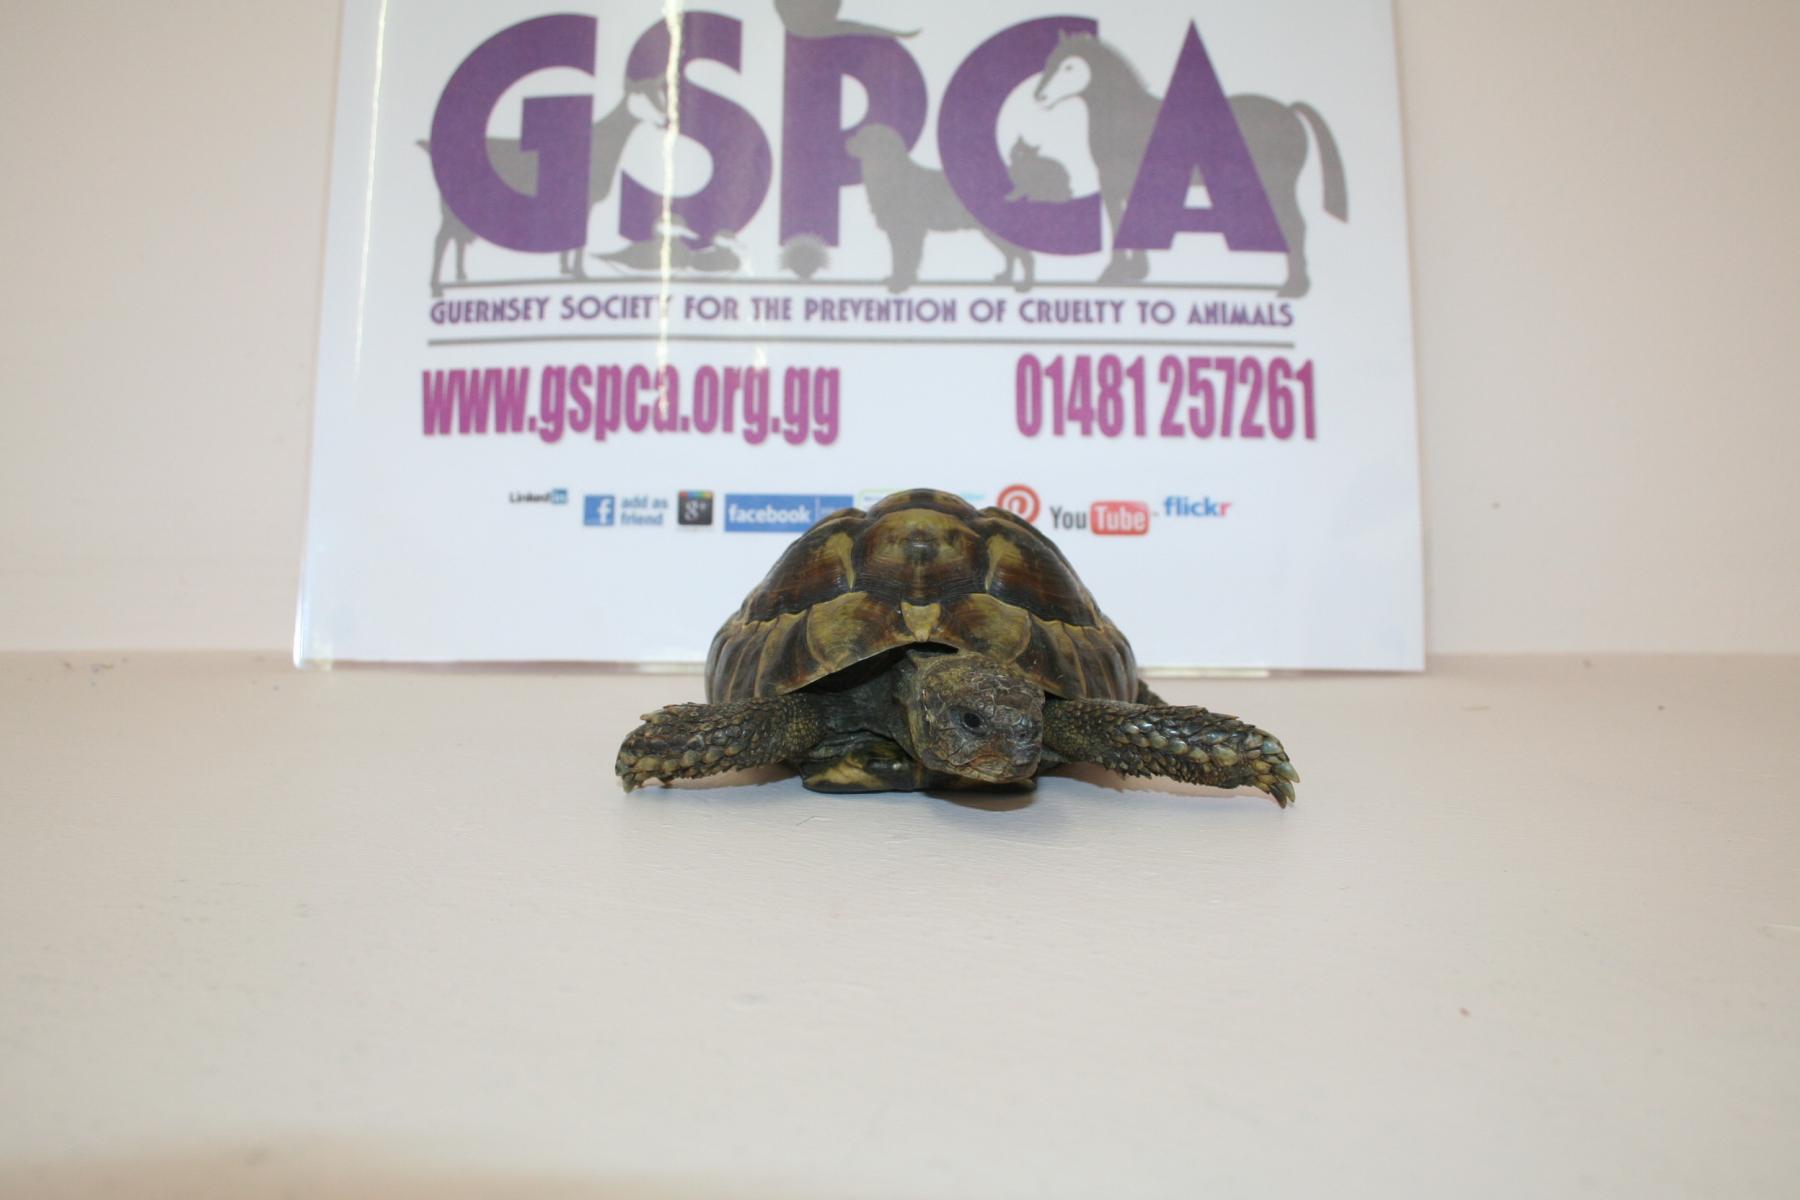 Stray tortoise at the GSPCA in Guernsey